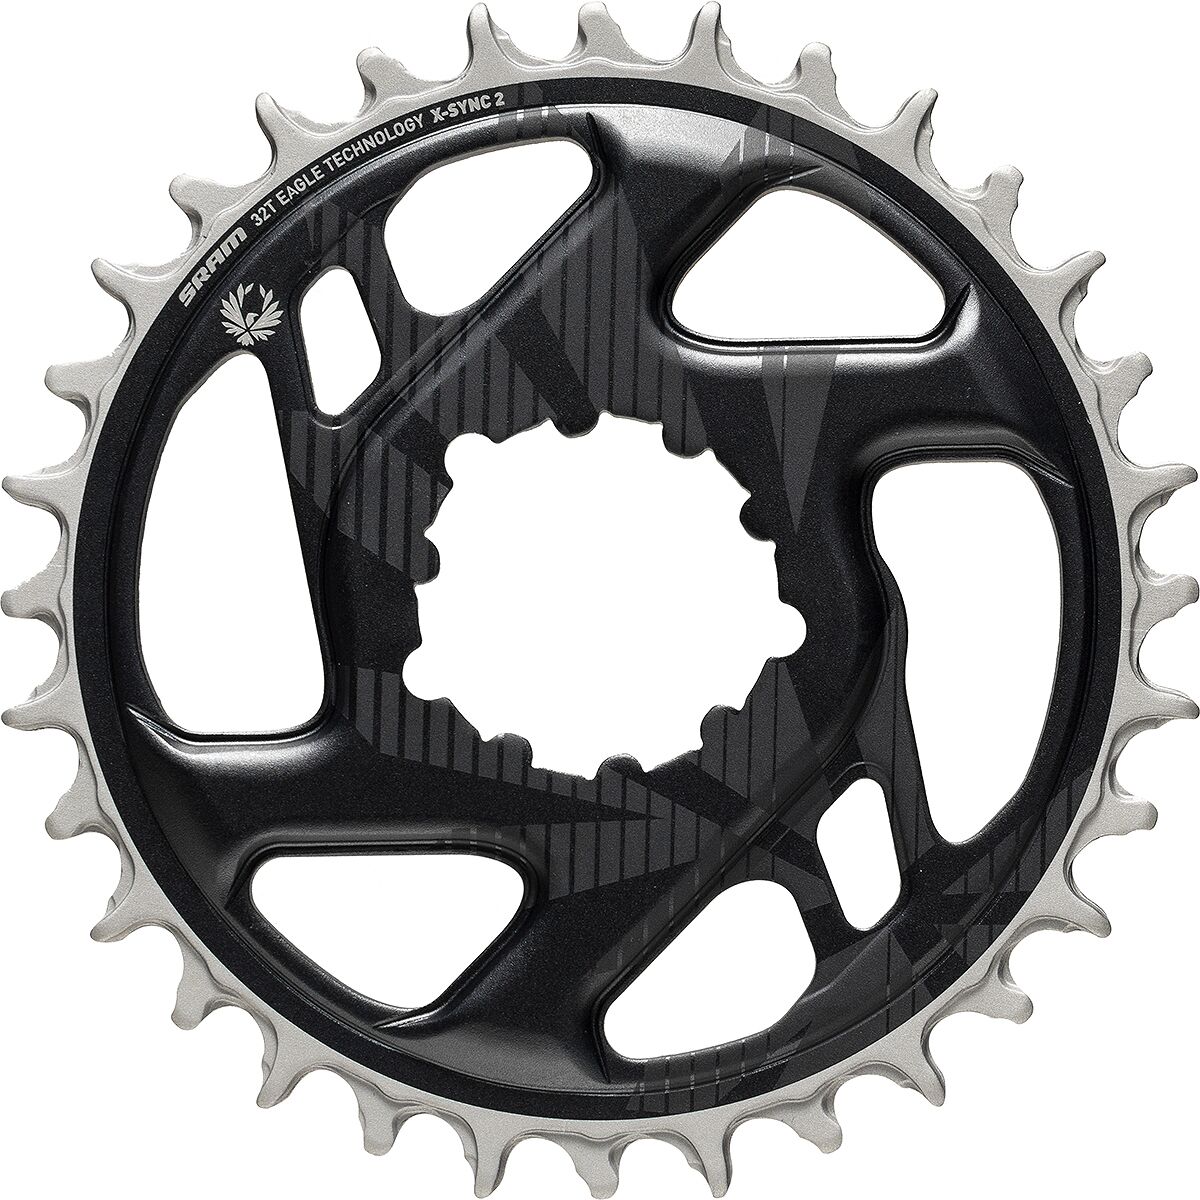 SRAM X-Sync 2 Eagle Cold Forged Direct Mount Chainring Lunar Grey, 34T/6mm Offset